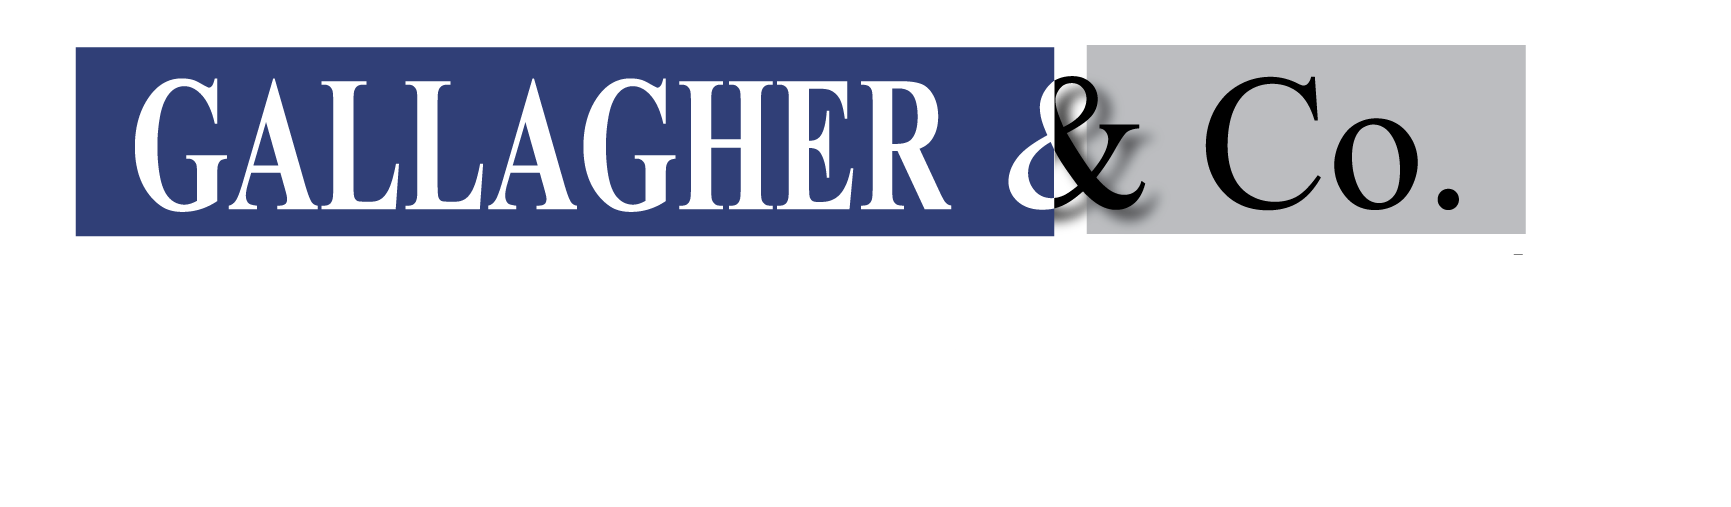 Gallagher & Co Consultants